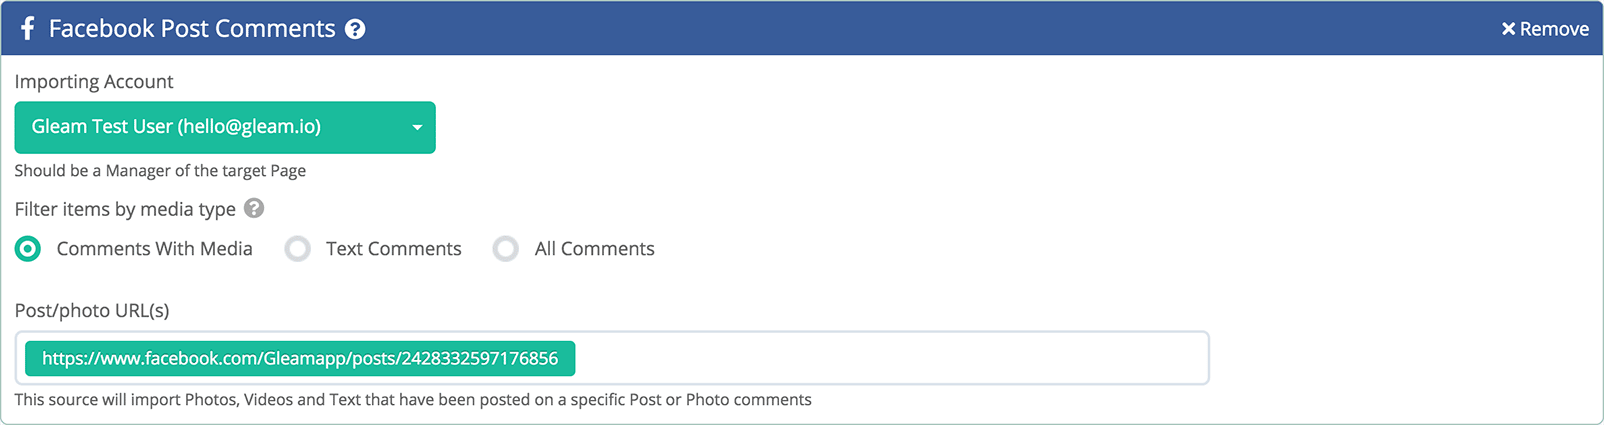 Gleam interface showing linked Facebook account for Facebook post/photo comments